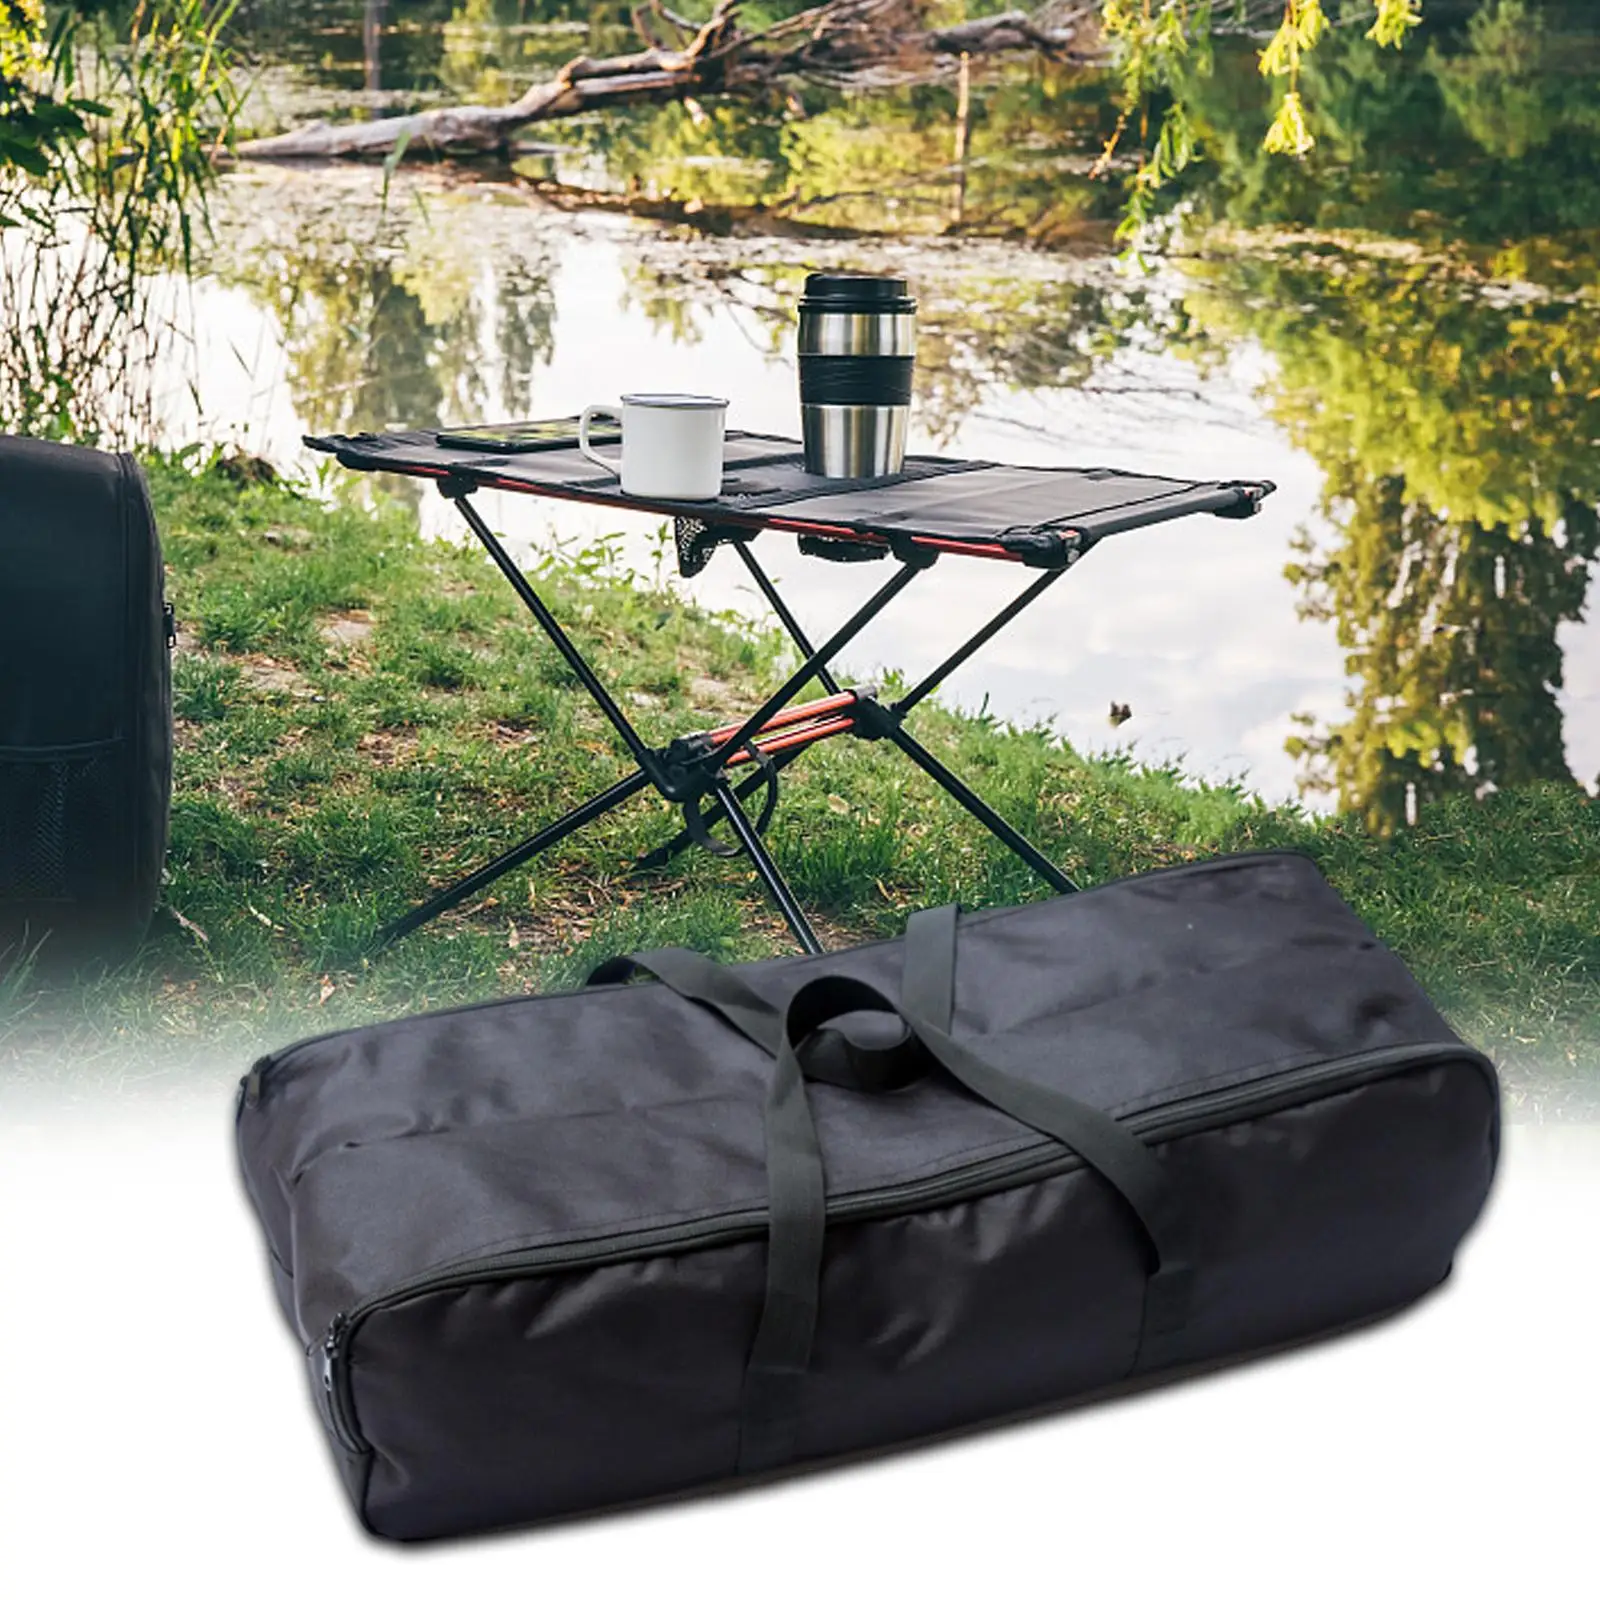 Camping Tool Bag Folding Chair Storage Bag Oxford Cloth for Camera Bracket and Fishing Pole Dimension 67x29x19cm Carrying Bag